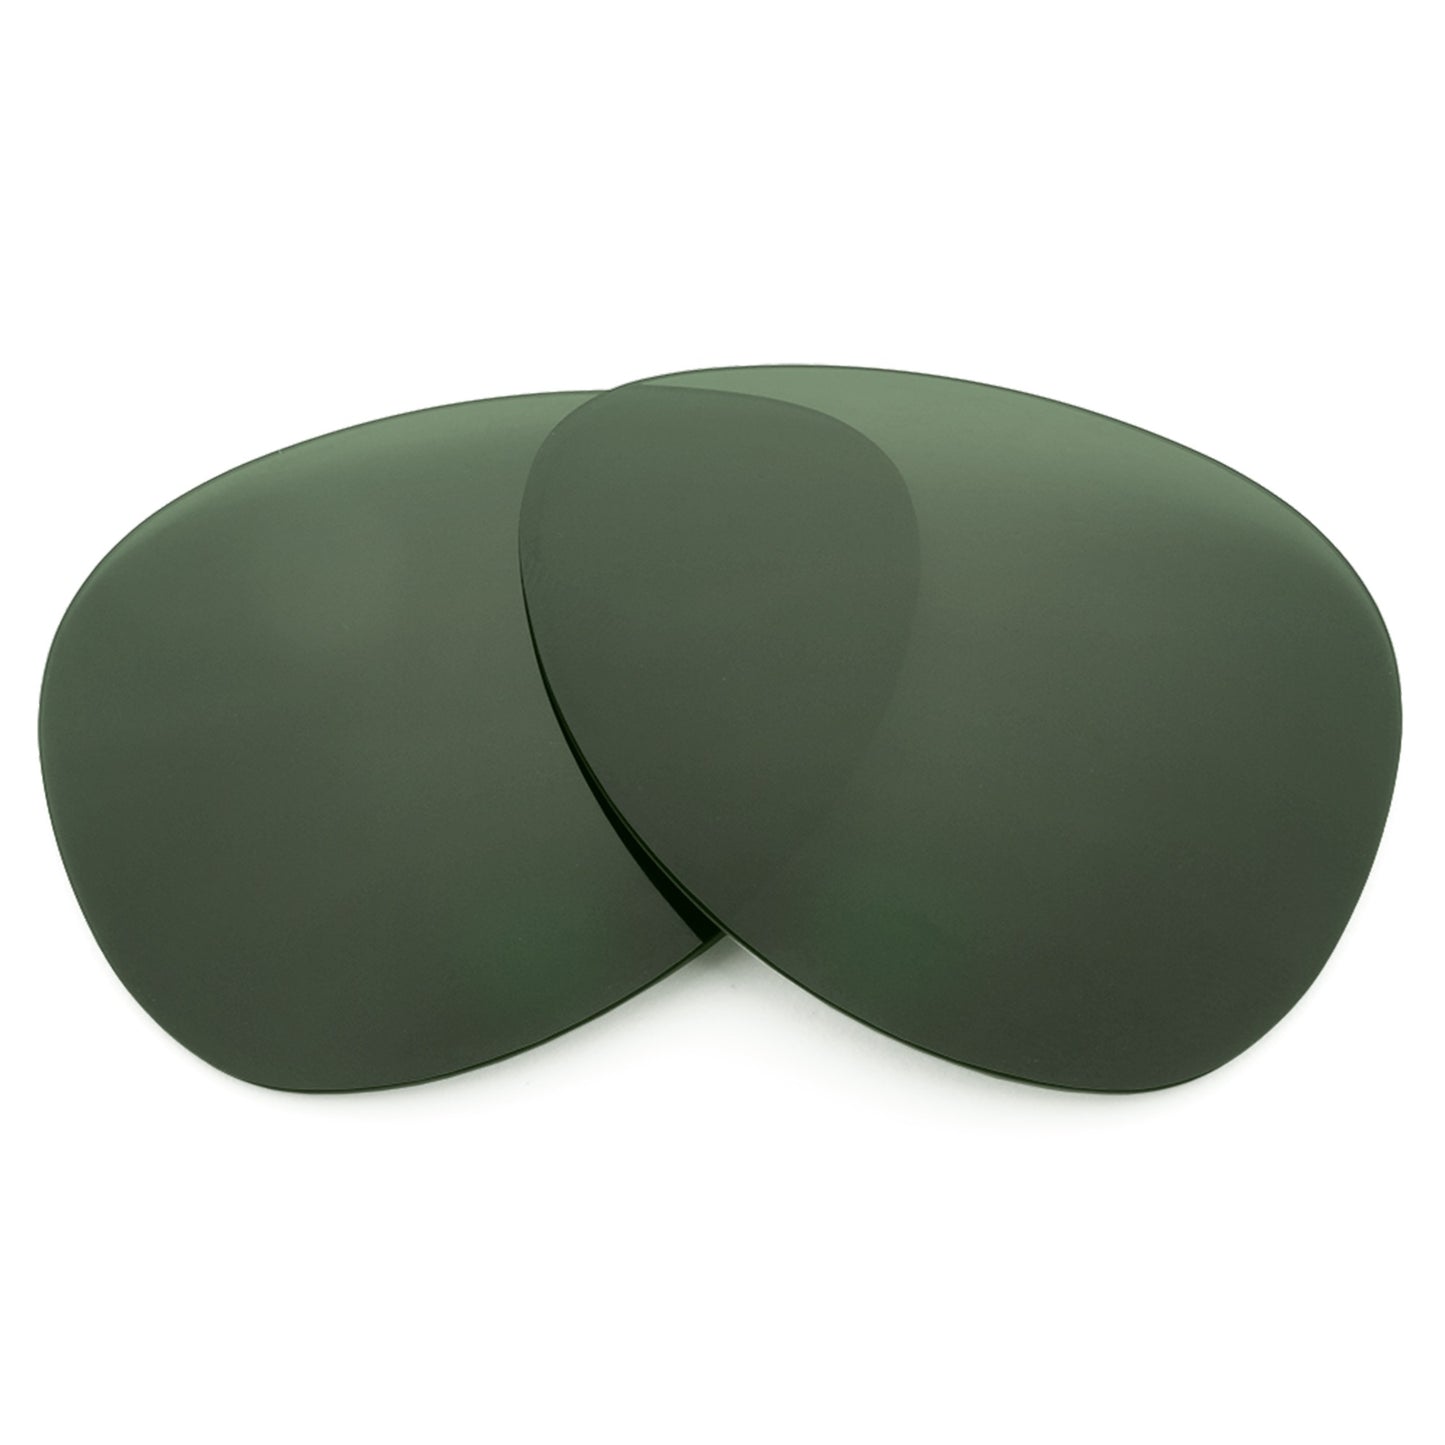 Revant replacement lenses for Ray-Ban Cats 5000 RB4125 59mm Non-Polarized Gray Green